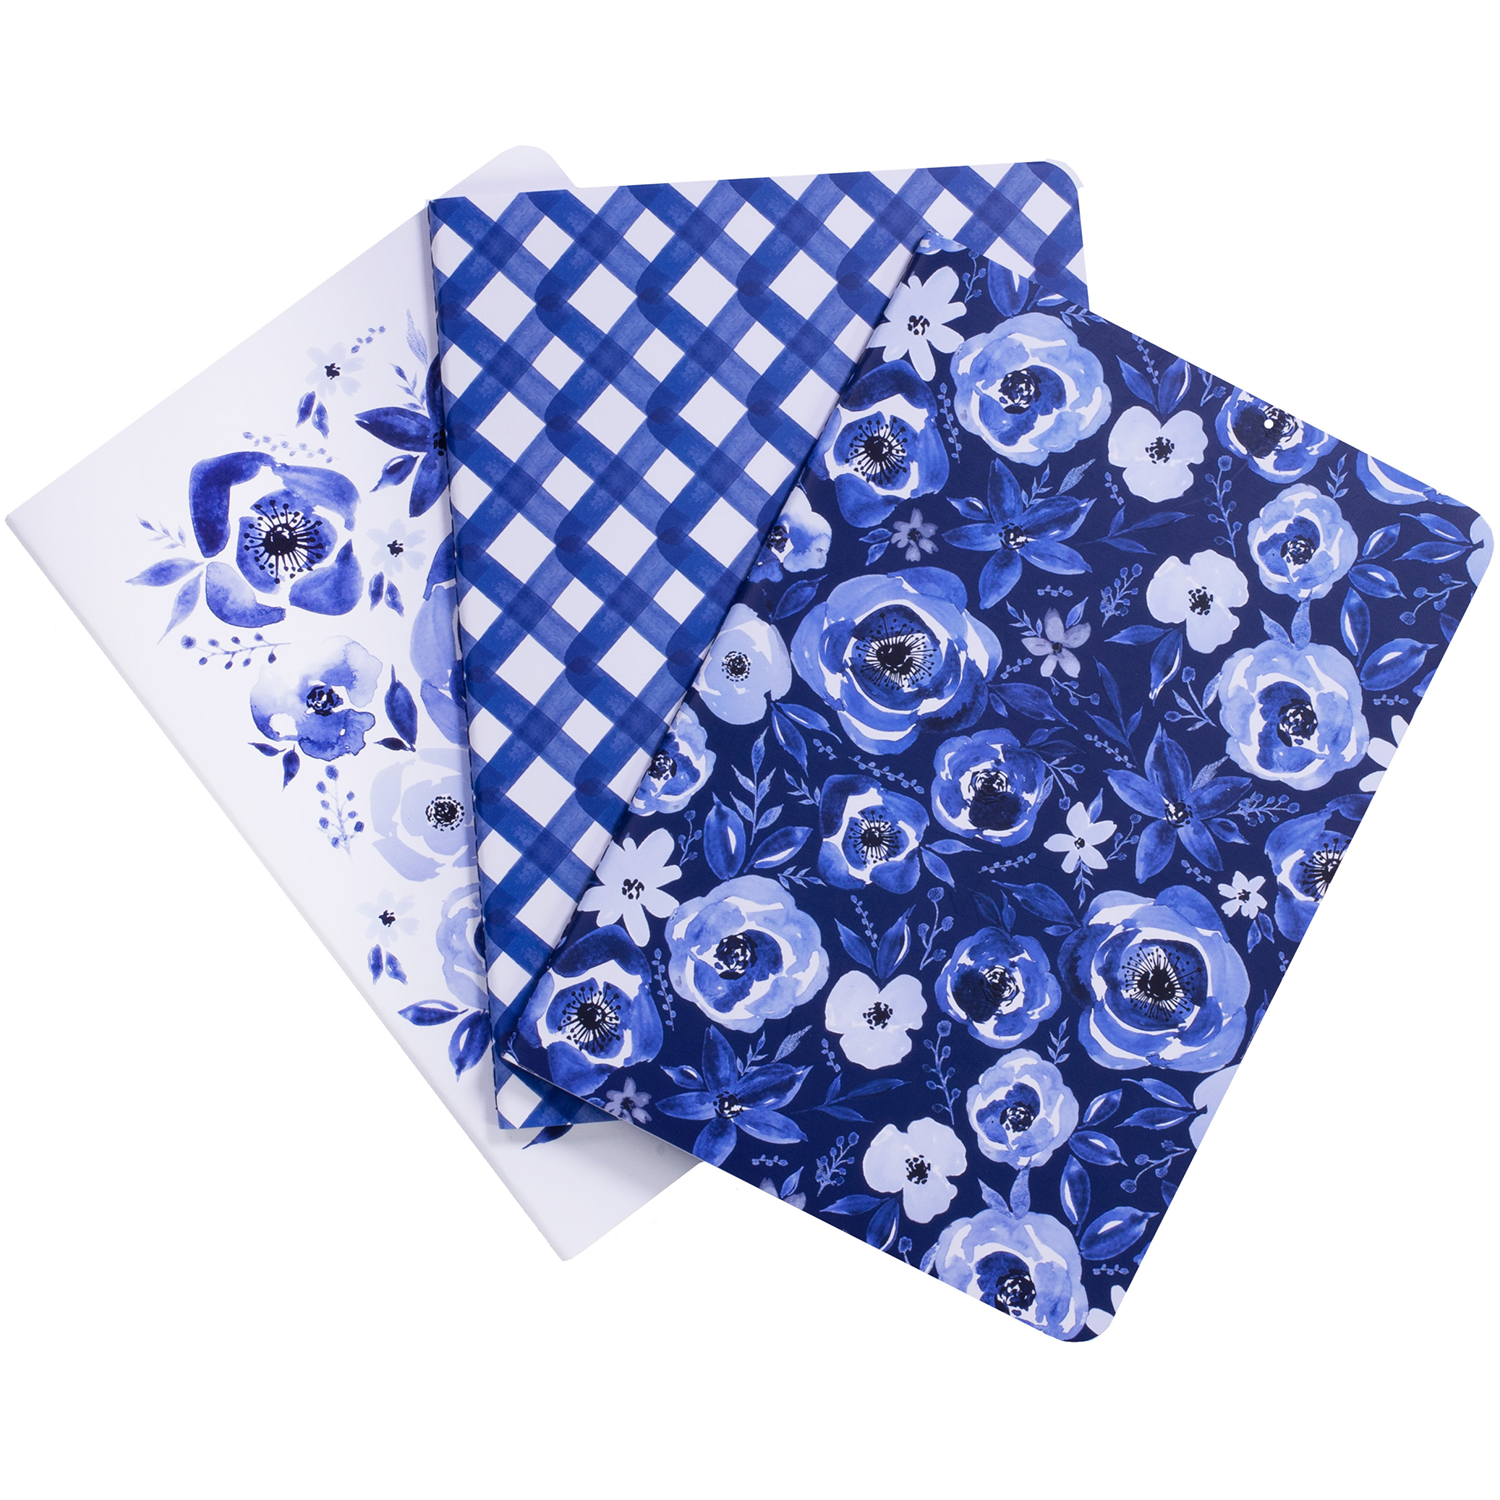 Watercolor Blue Floral Notepad Set, Floral Stationary Paper and